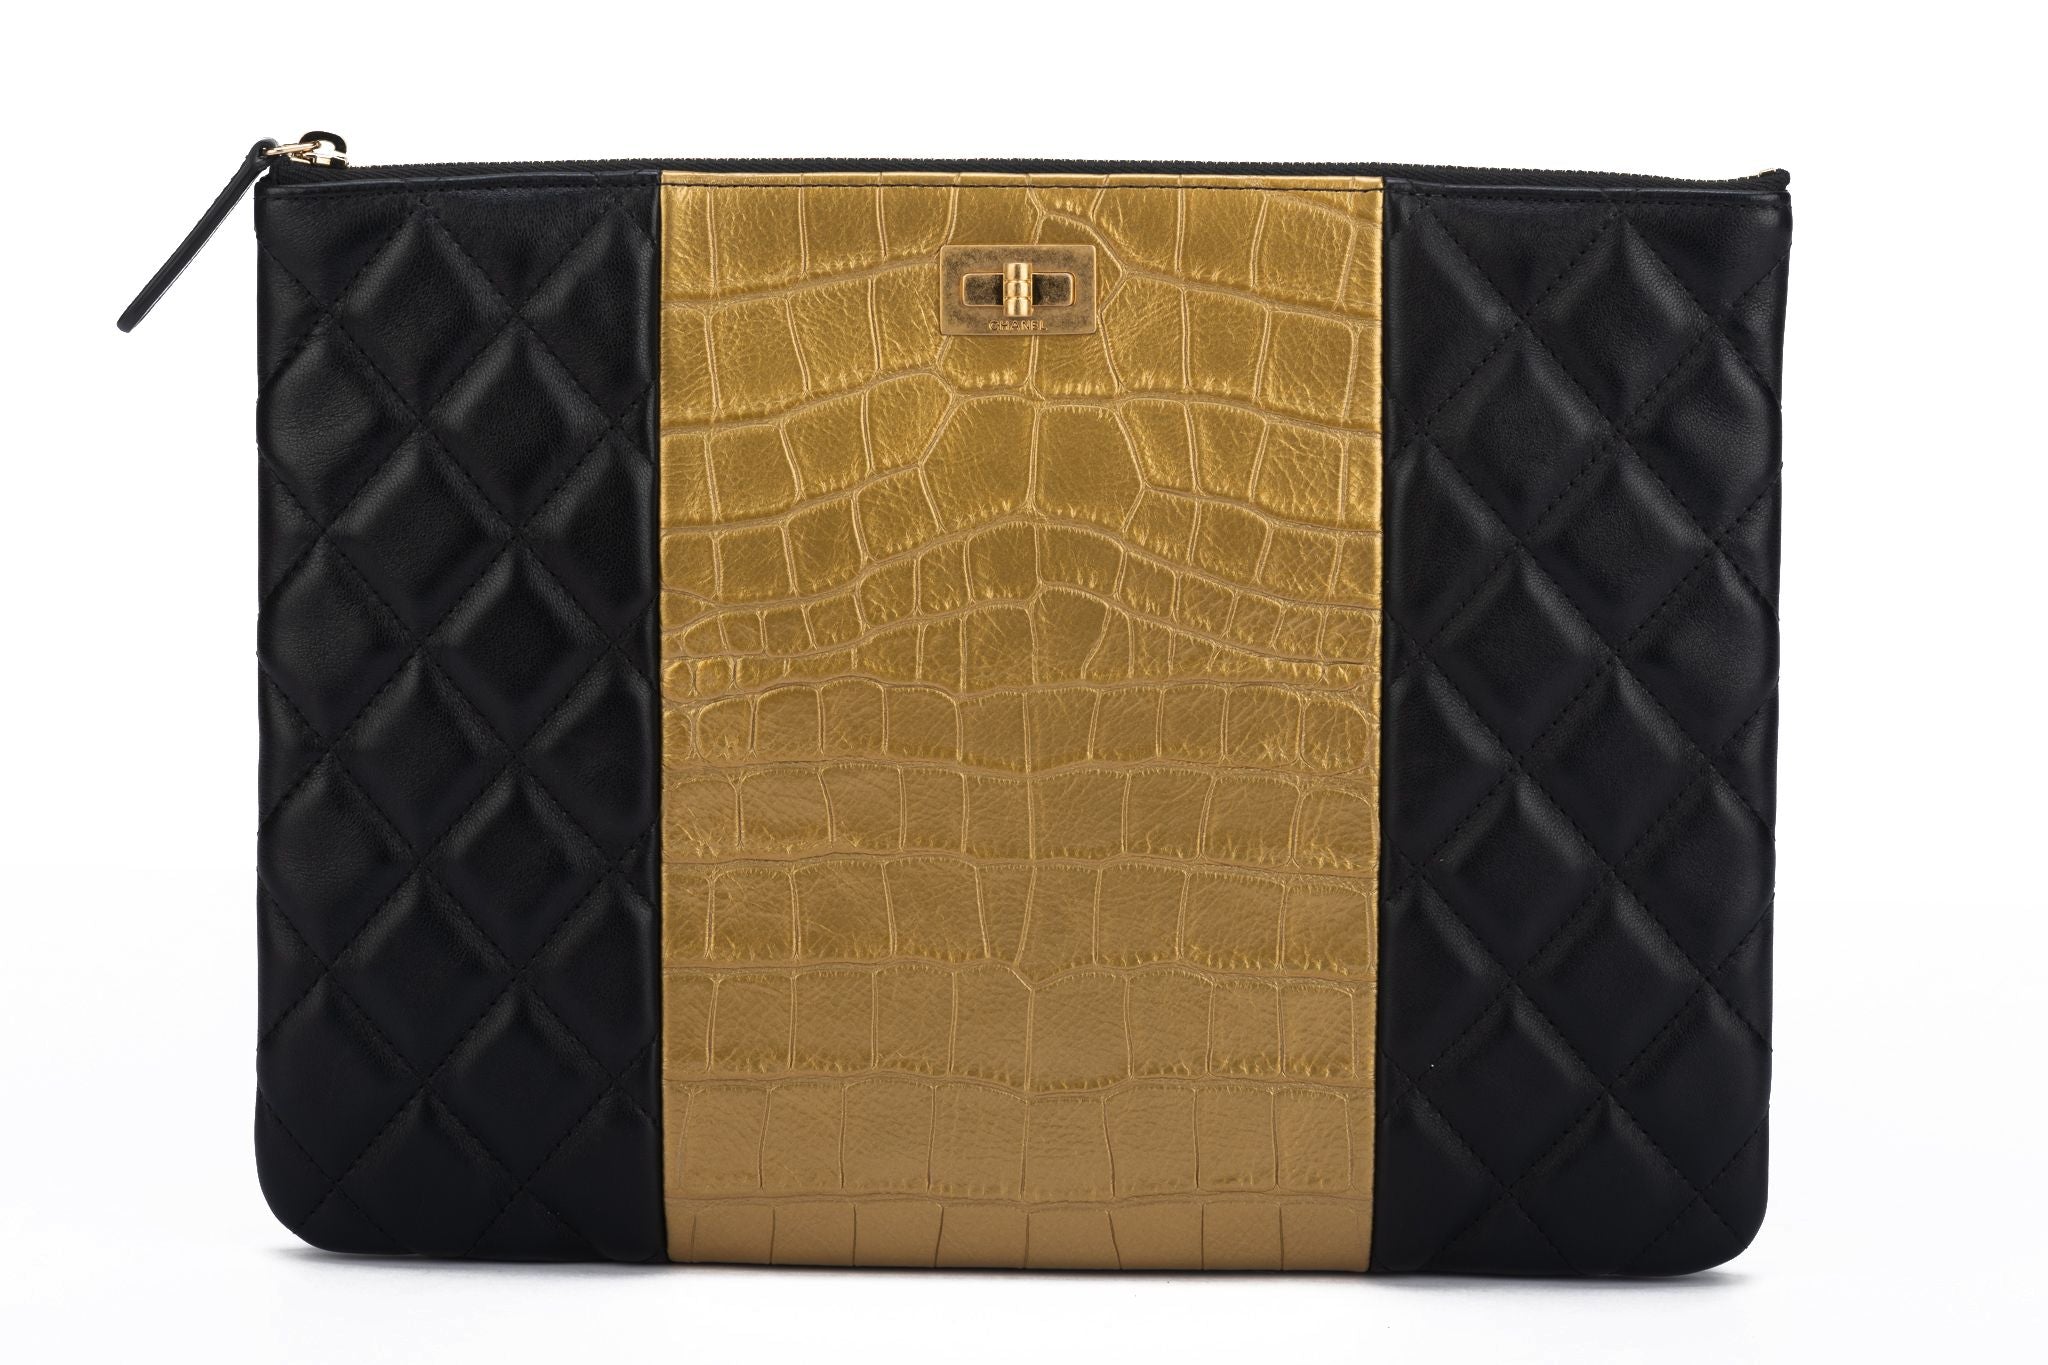 gold chanel pouch clutch